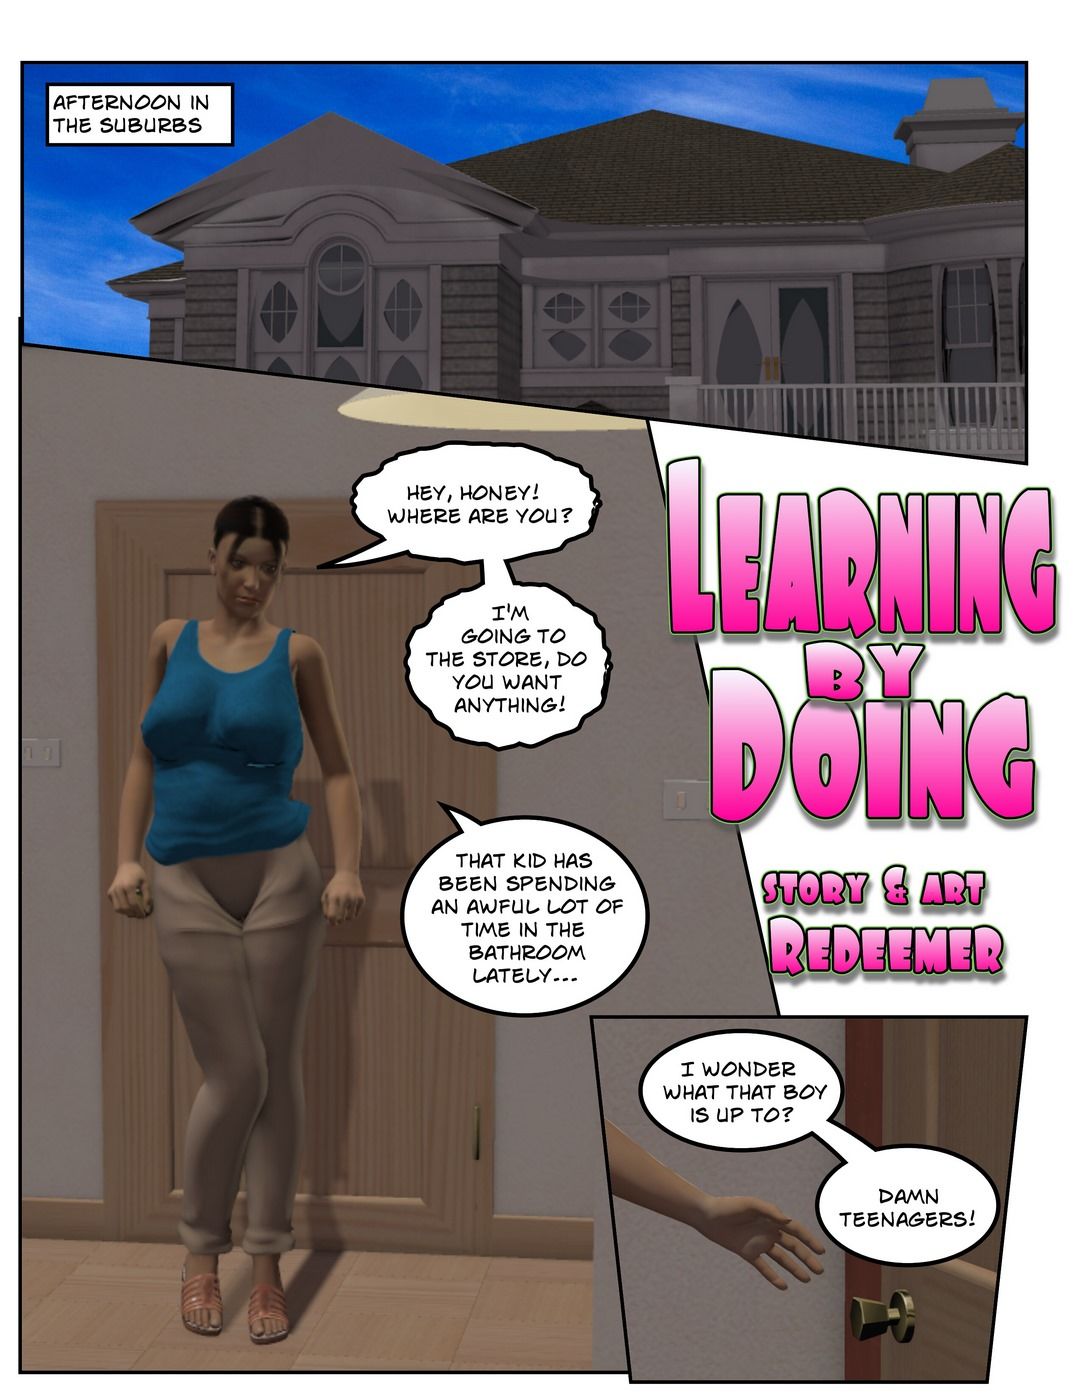 Redeemer - Learning by doing-Incest page 1